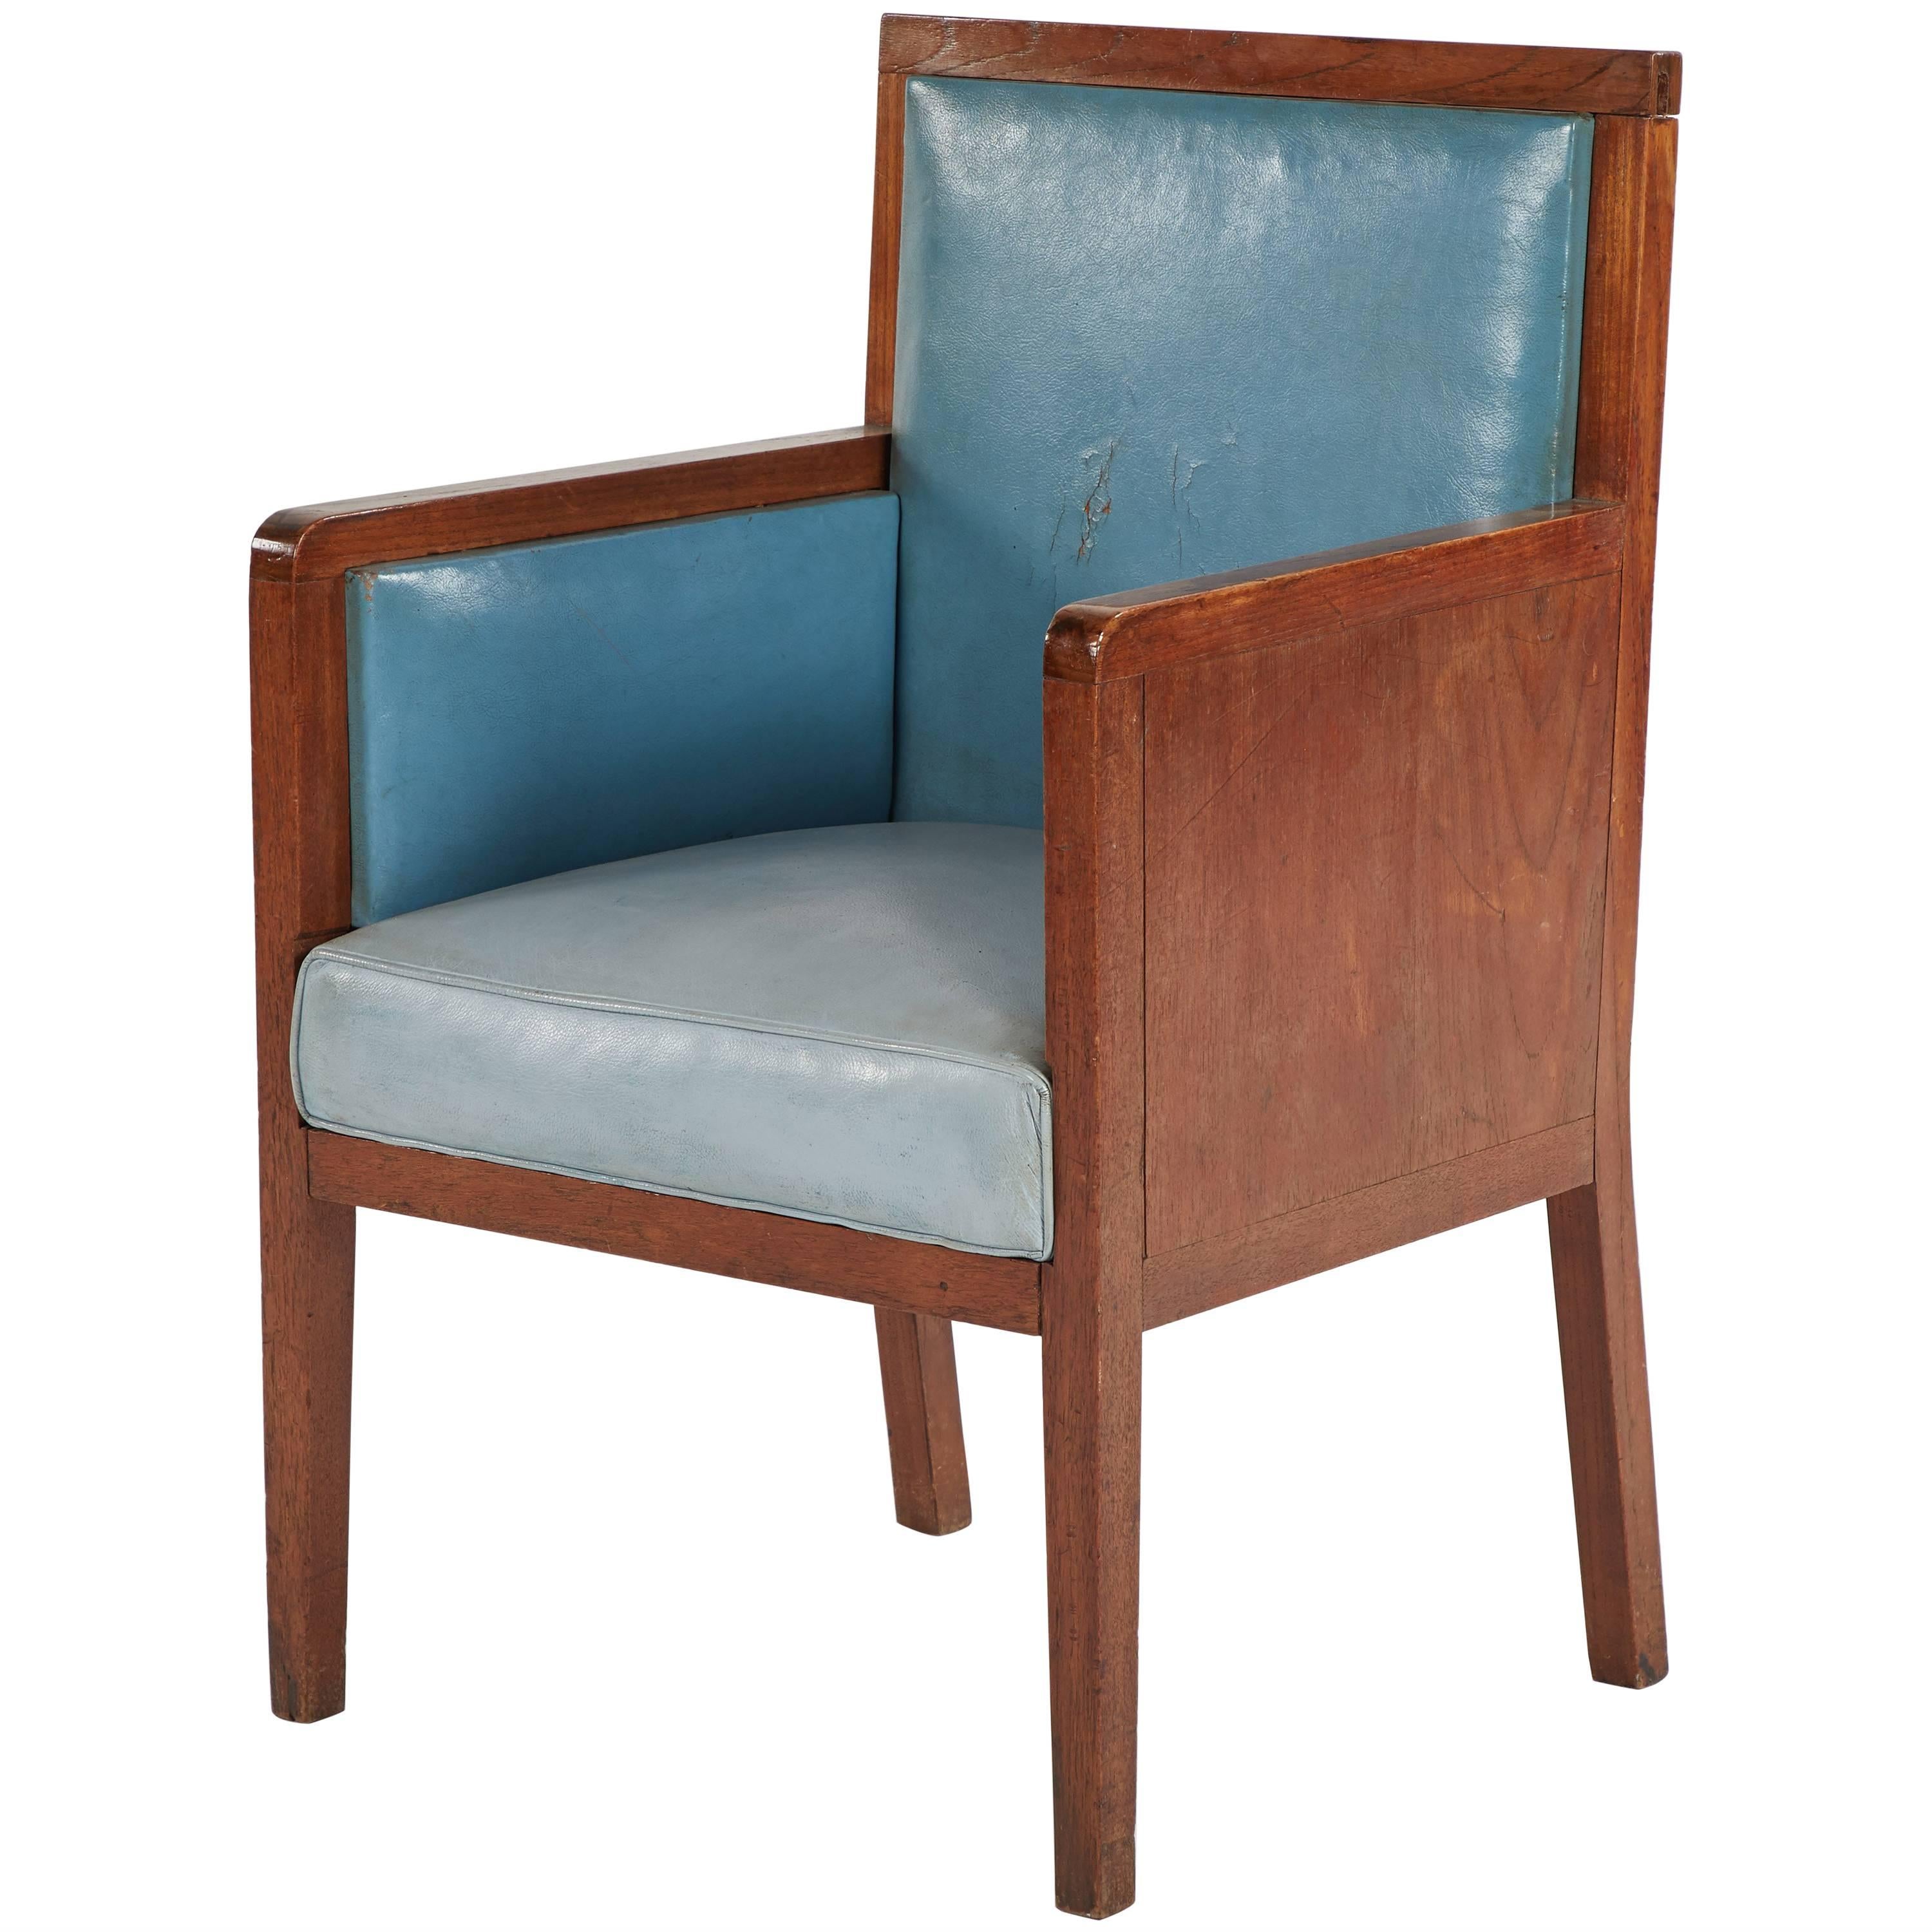 Art Deco Wooden Armchair Upholstered in Blue Leather from France